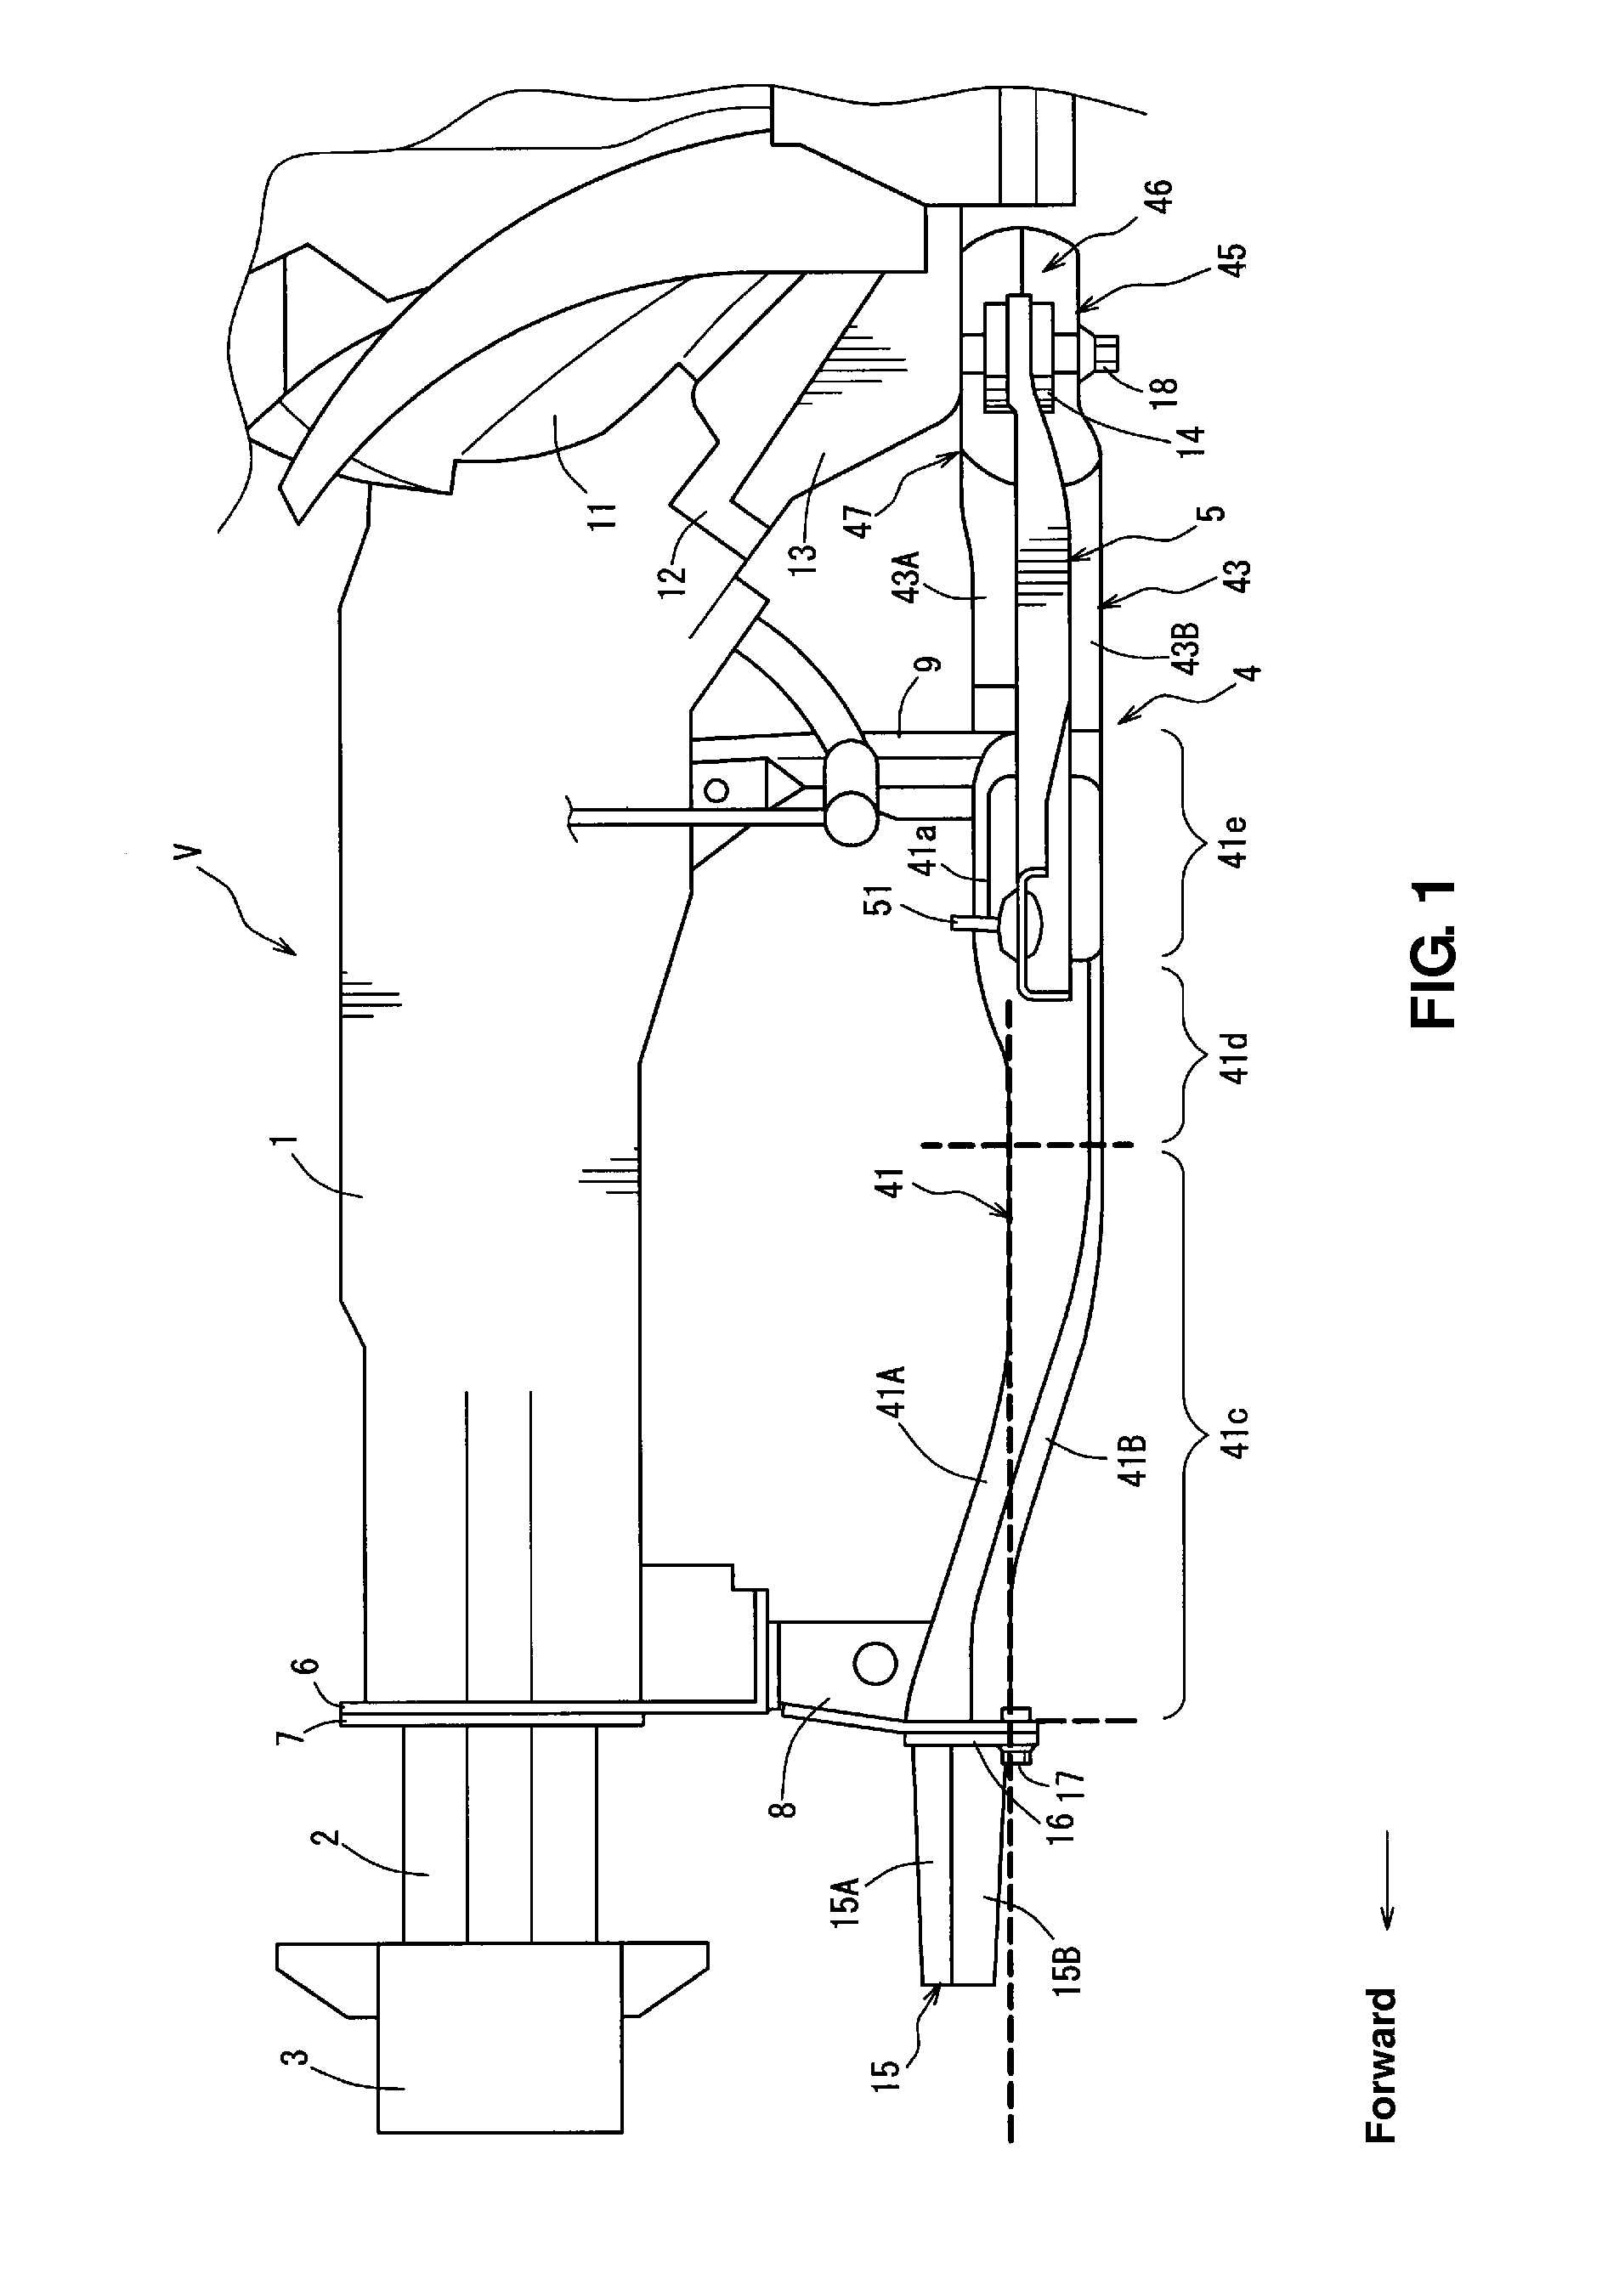 Front vehicle-body structure of vehicle